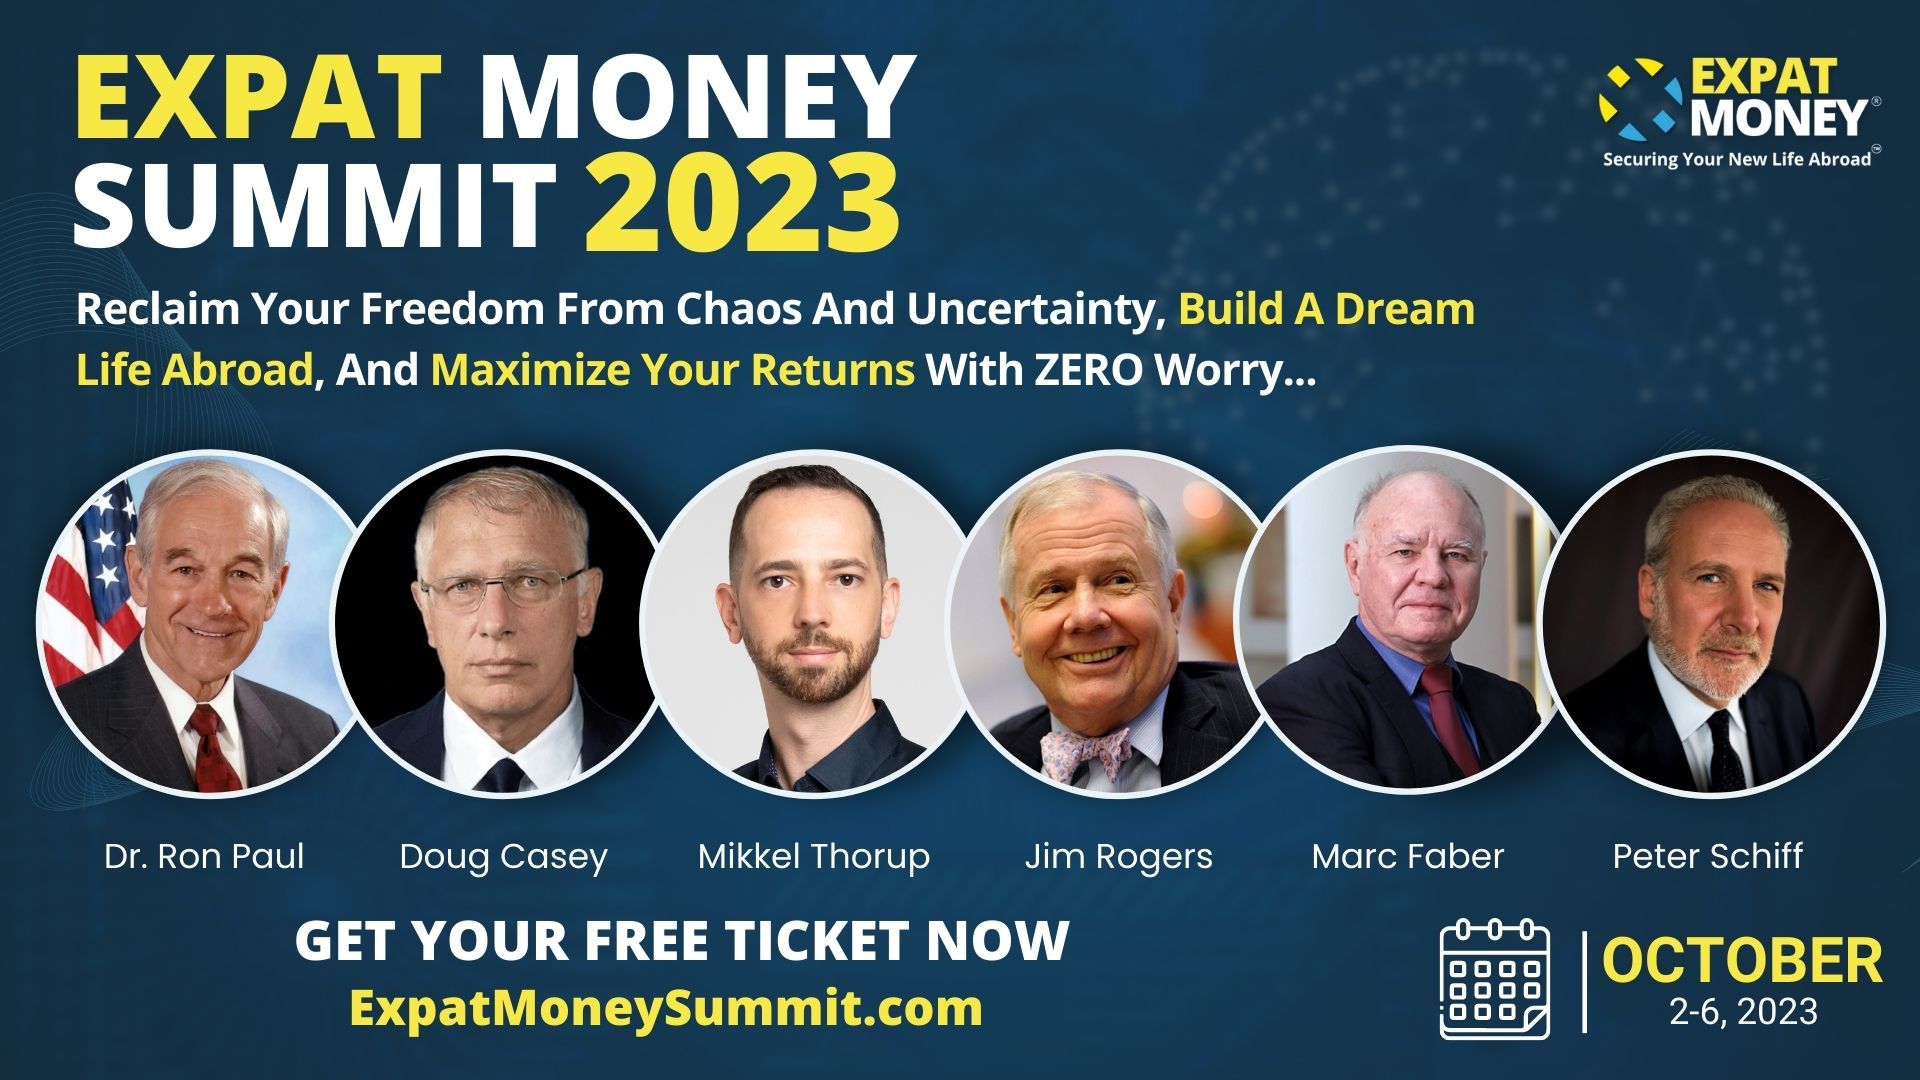 Expat Money Summit 2023 Banners (1920 × 1080 px)